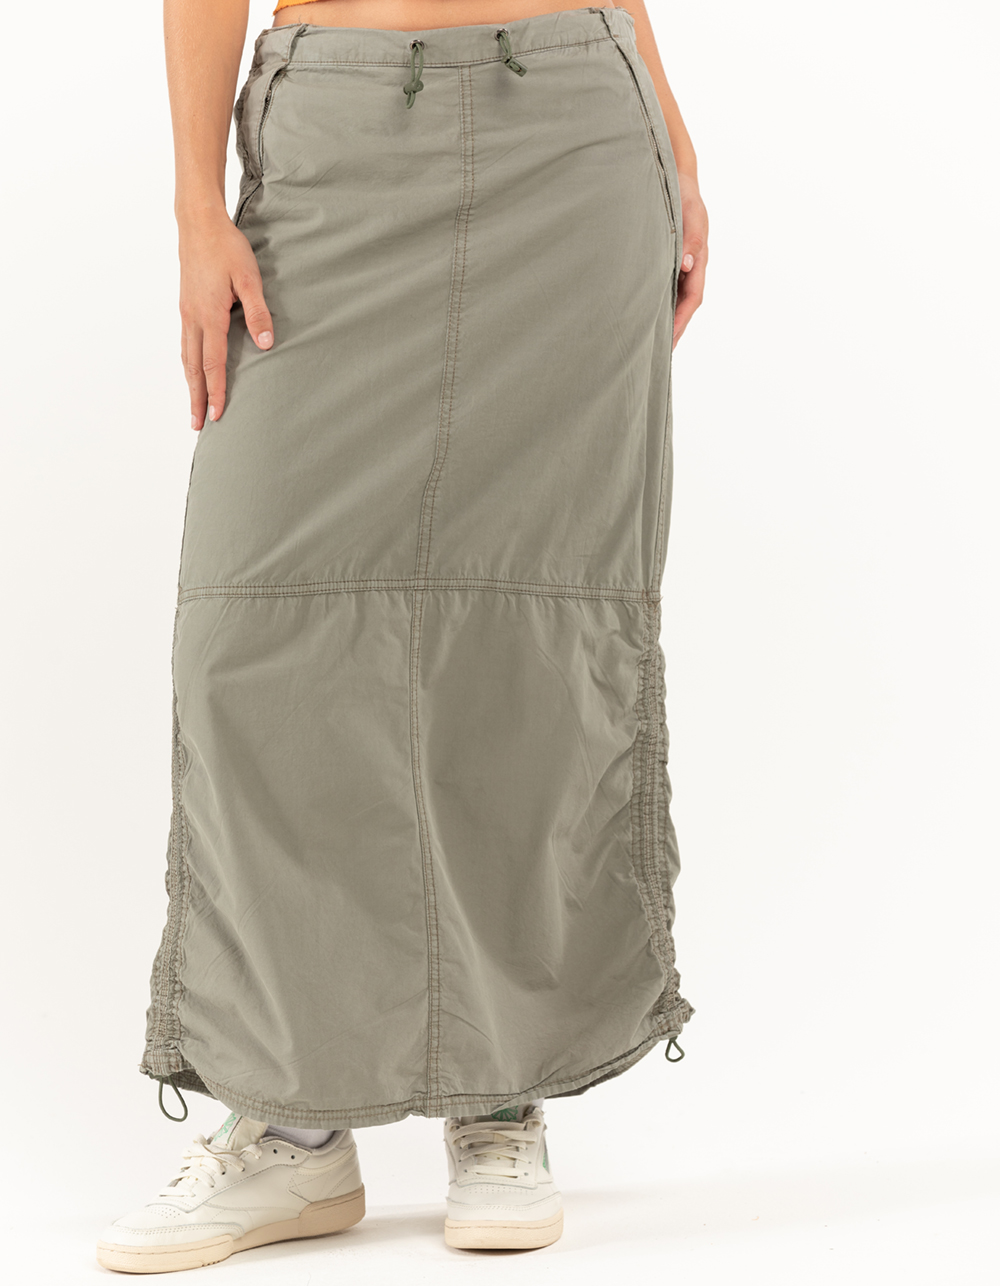 BDG Urban Outfitters Maxi Utility Skirt - OLIVE | Tillys